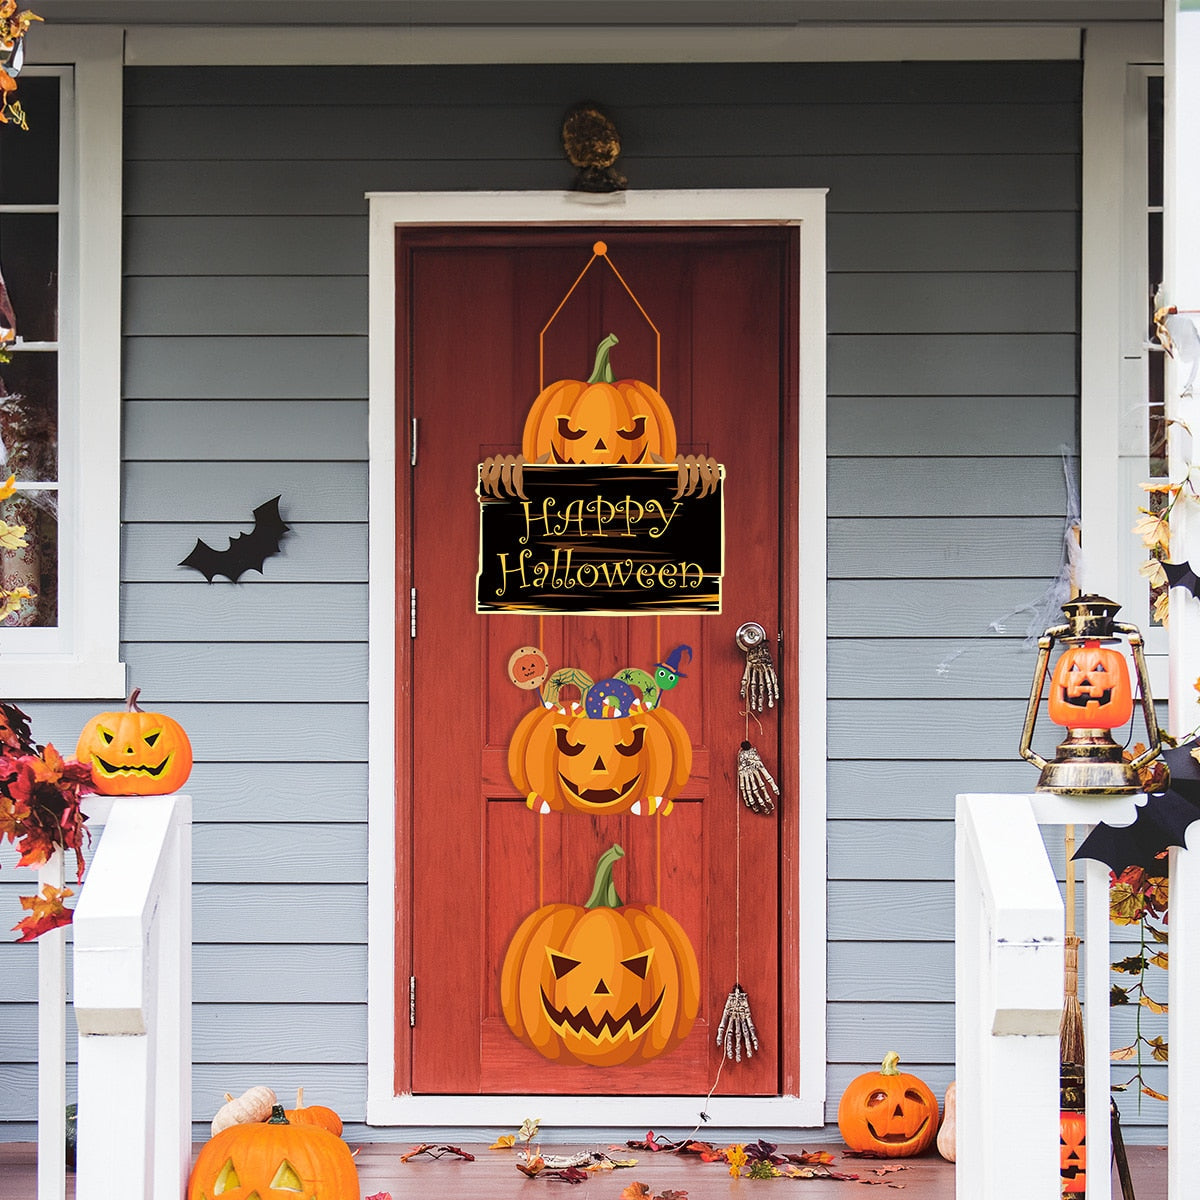 2023 Halloween Pumpkin Hanging Sign Spooky Witch Bat Trick or Treat Banner Front Door decor Halloween Party Decorations for Home acacuss